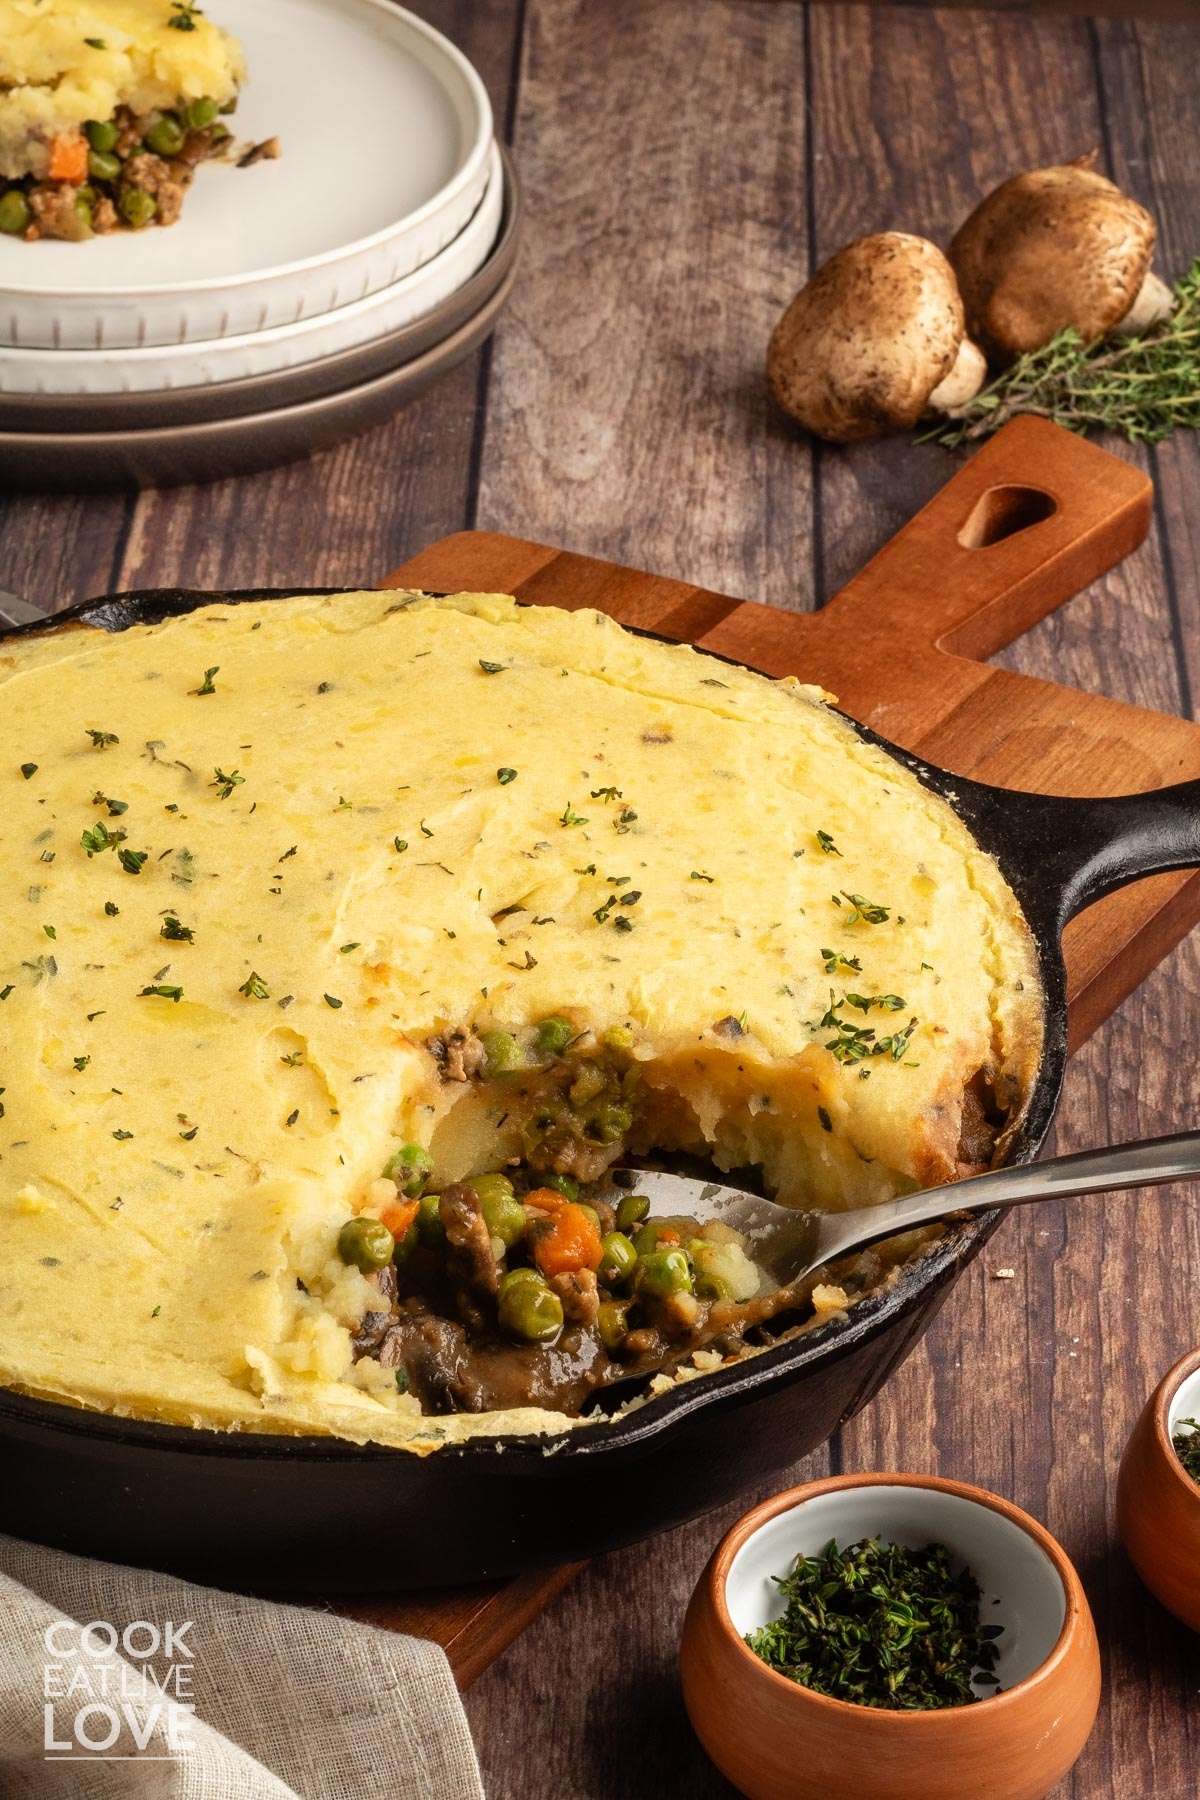 Mushroom shepherd's pie in a skillet on the table with a spoon and some scooped out.